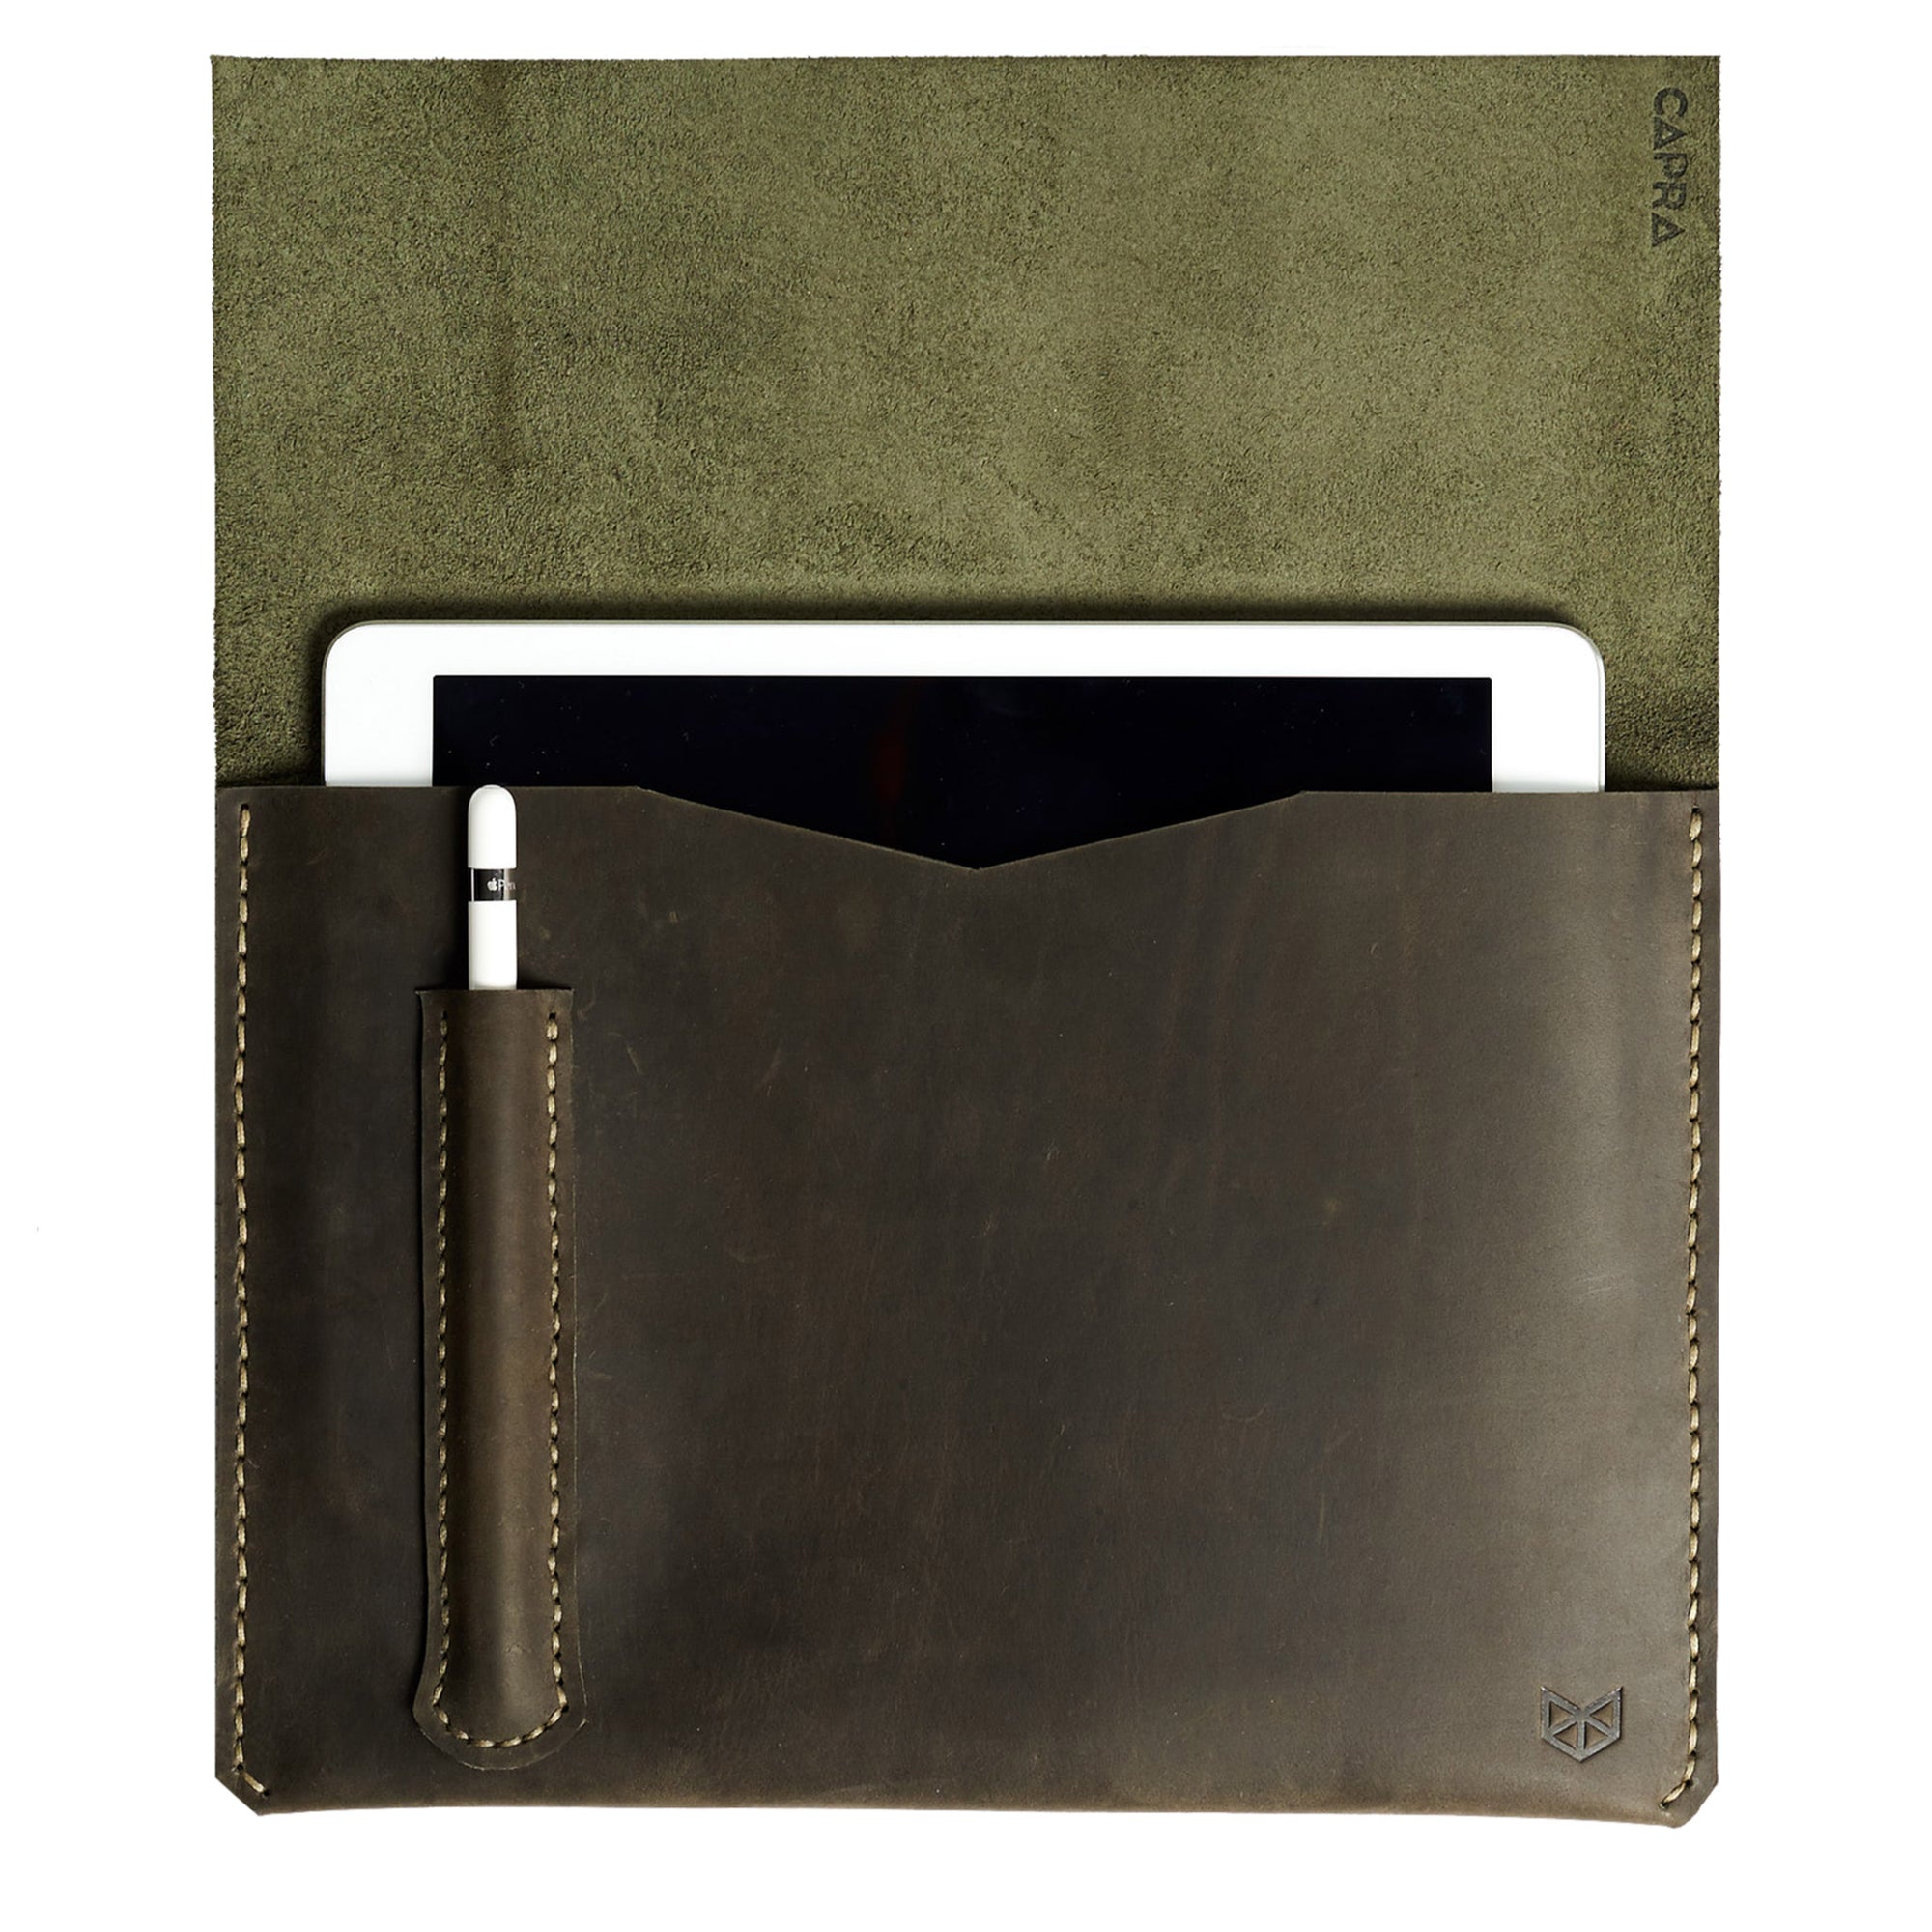 iPad Sleeve. iPad Leather Case Green With Apple Pencil Holder by Capra Leather